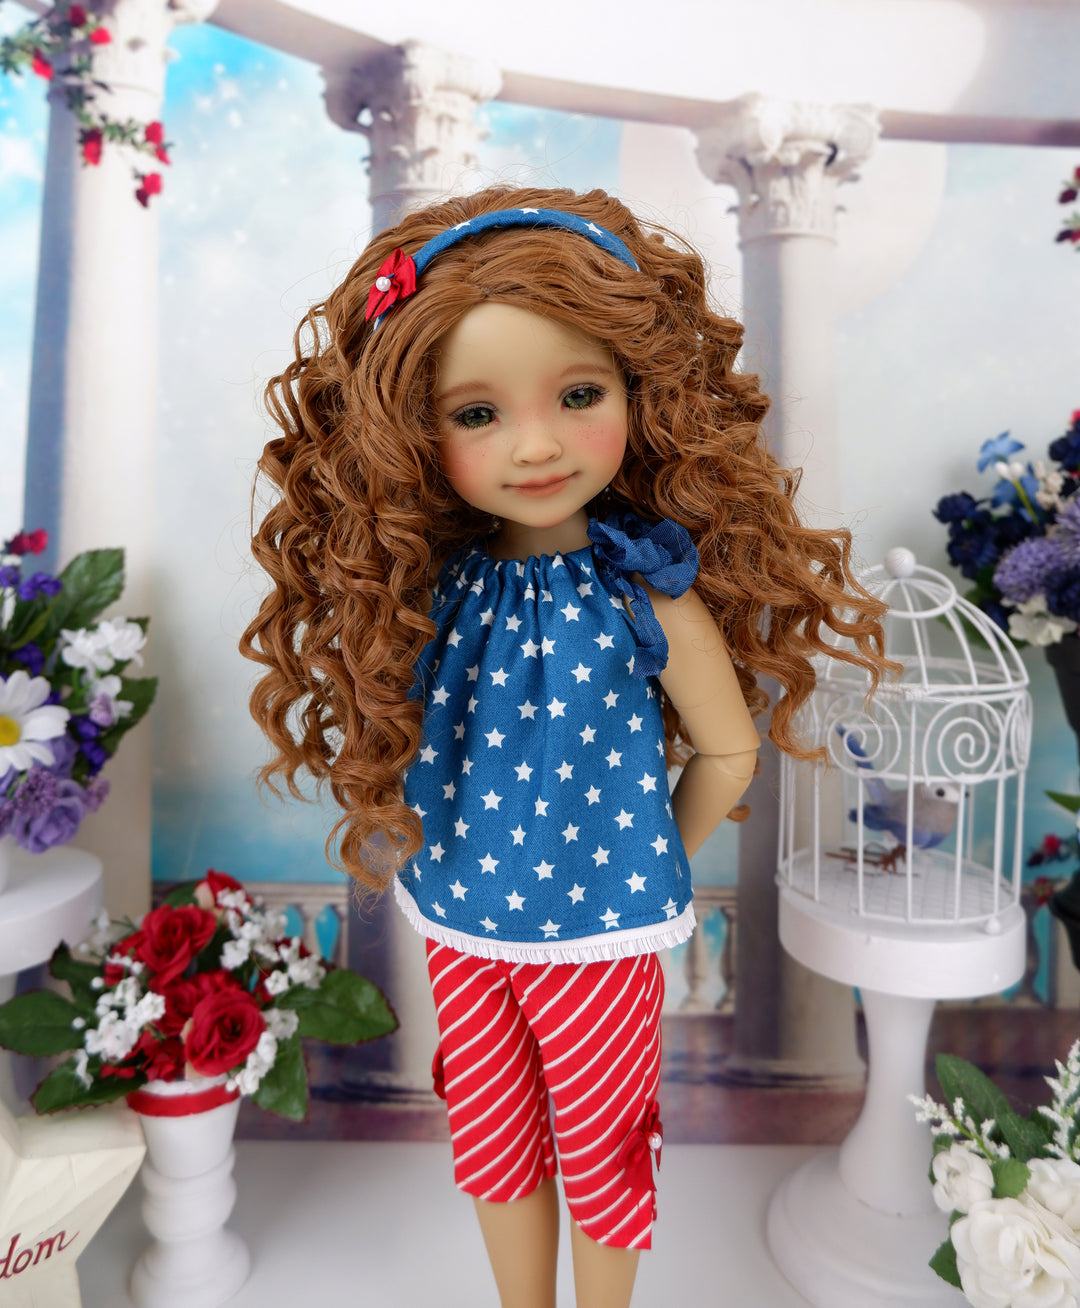 Miss Independence - top & capris with shoes for Ruby Red Fashion Friends doll